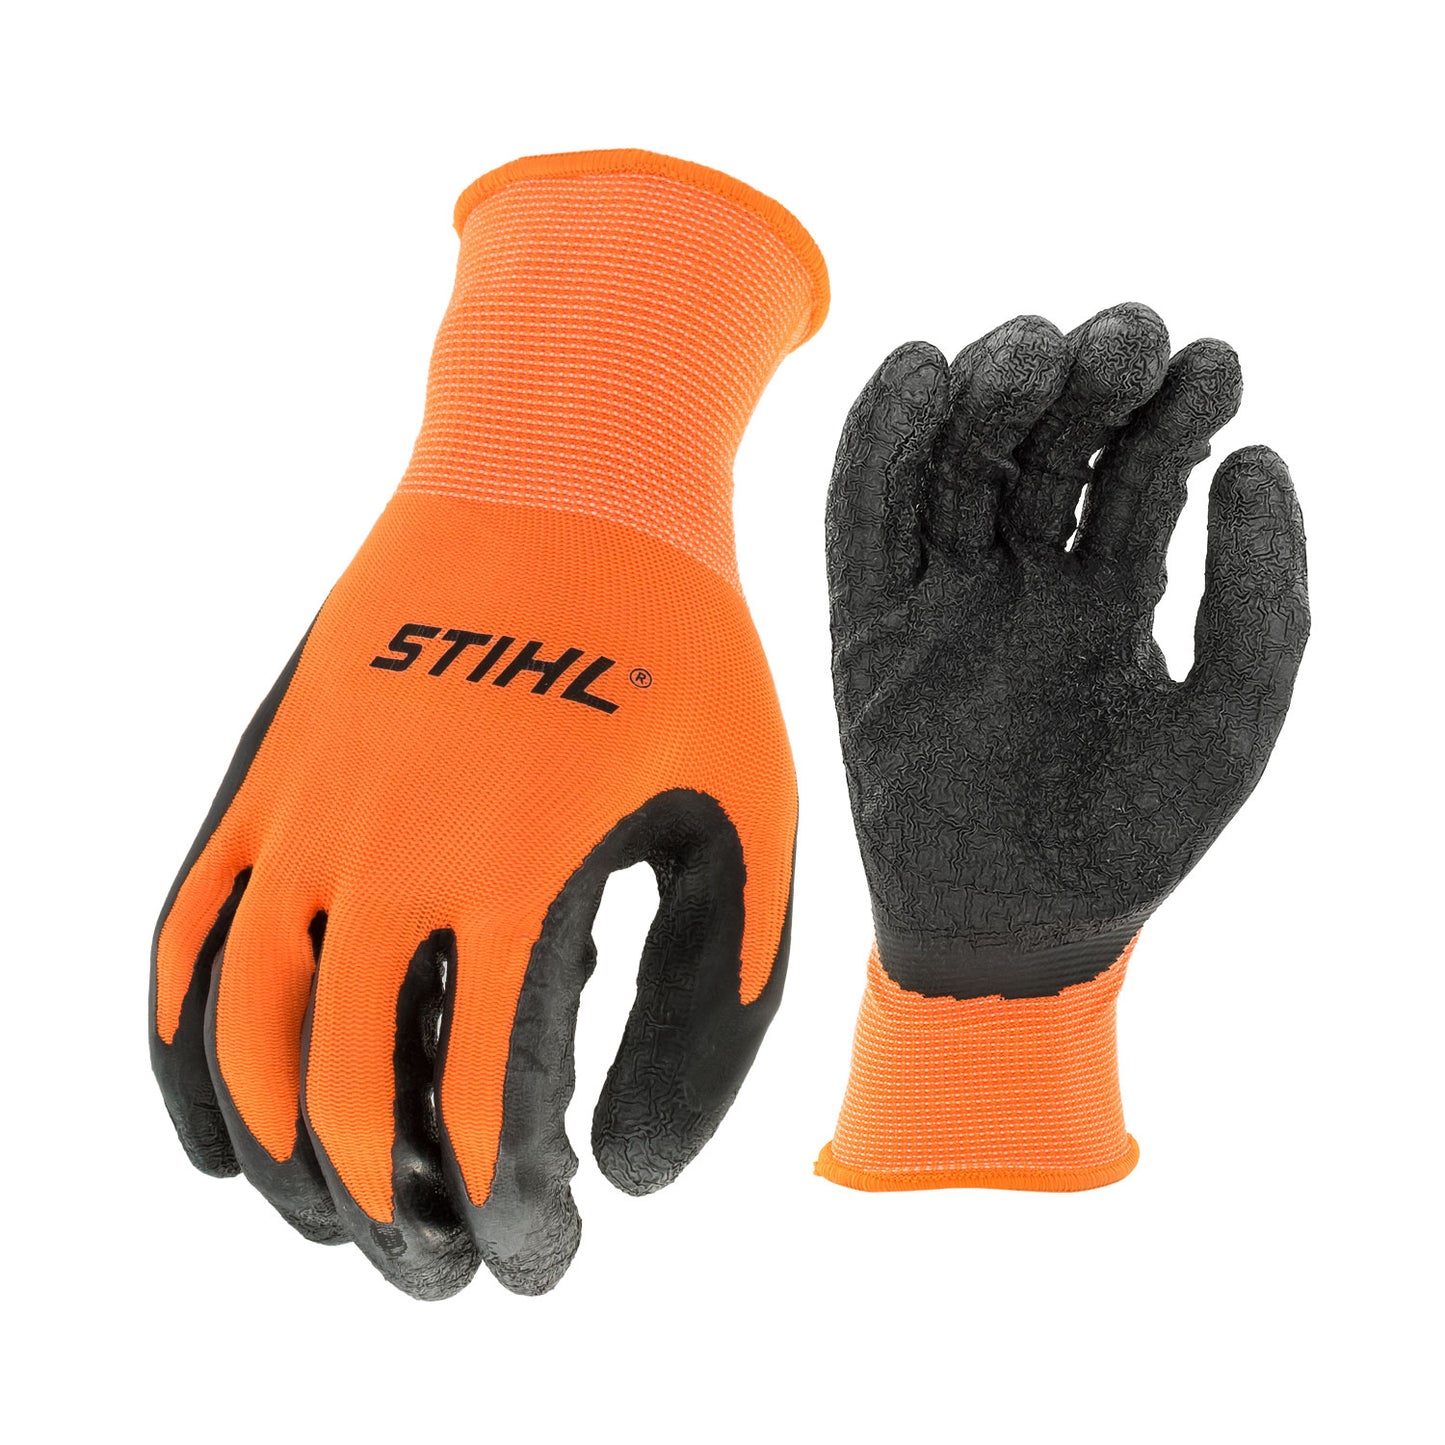 STIHL DuroGrip FUNCTION Protective Gloves